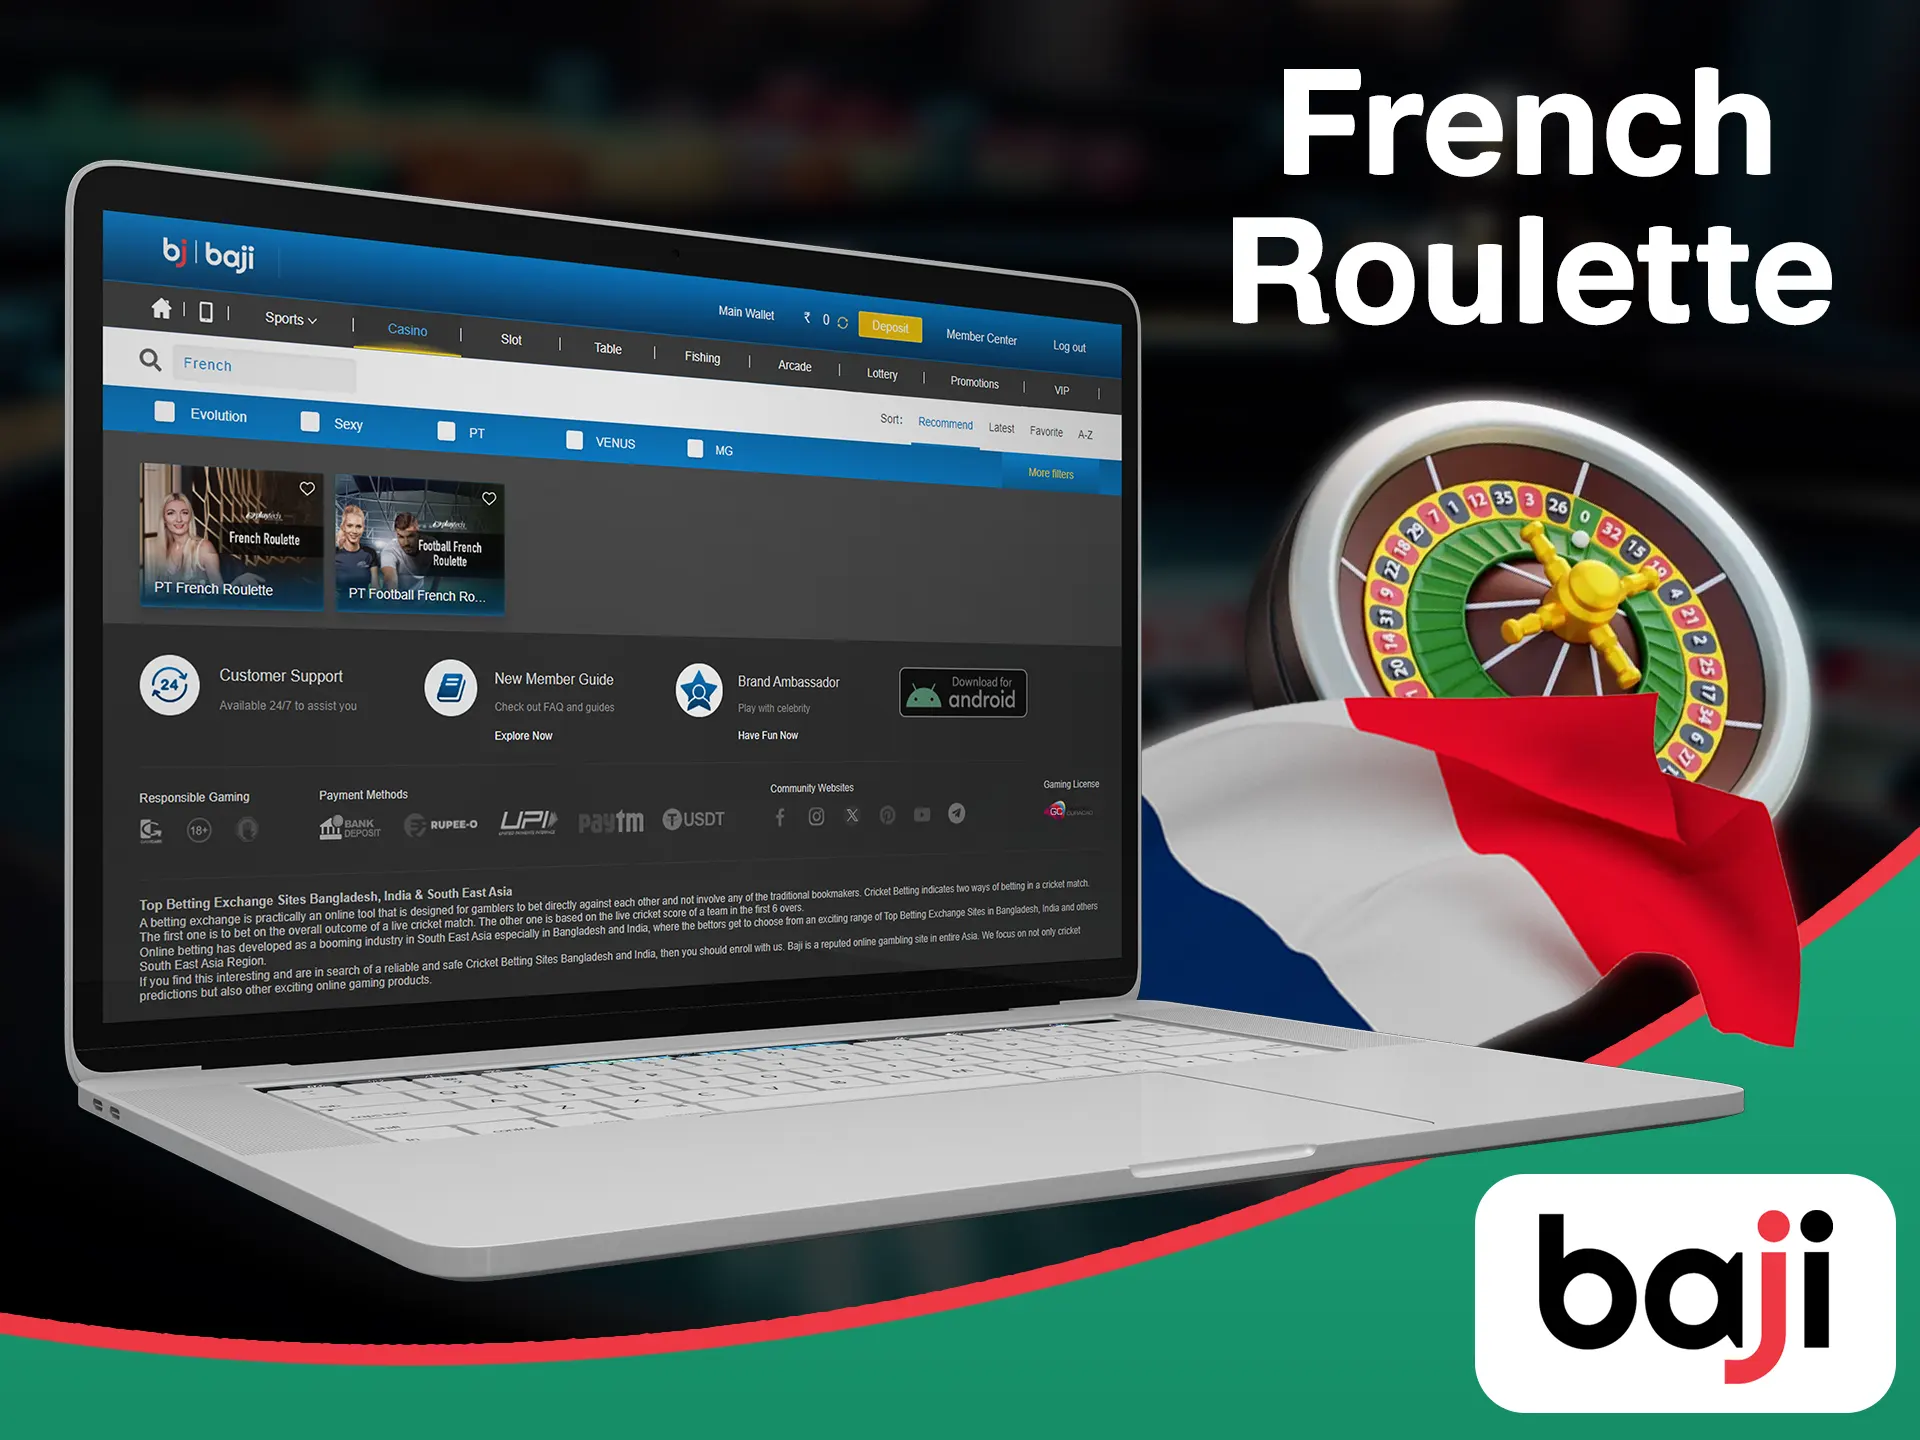 Play French type of roulette at the Baji.